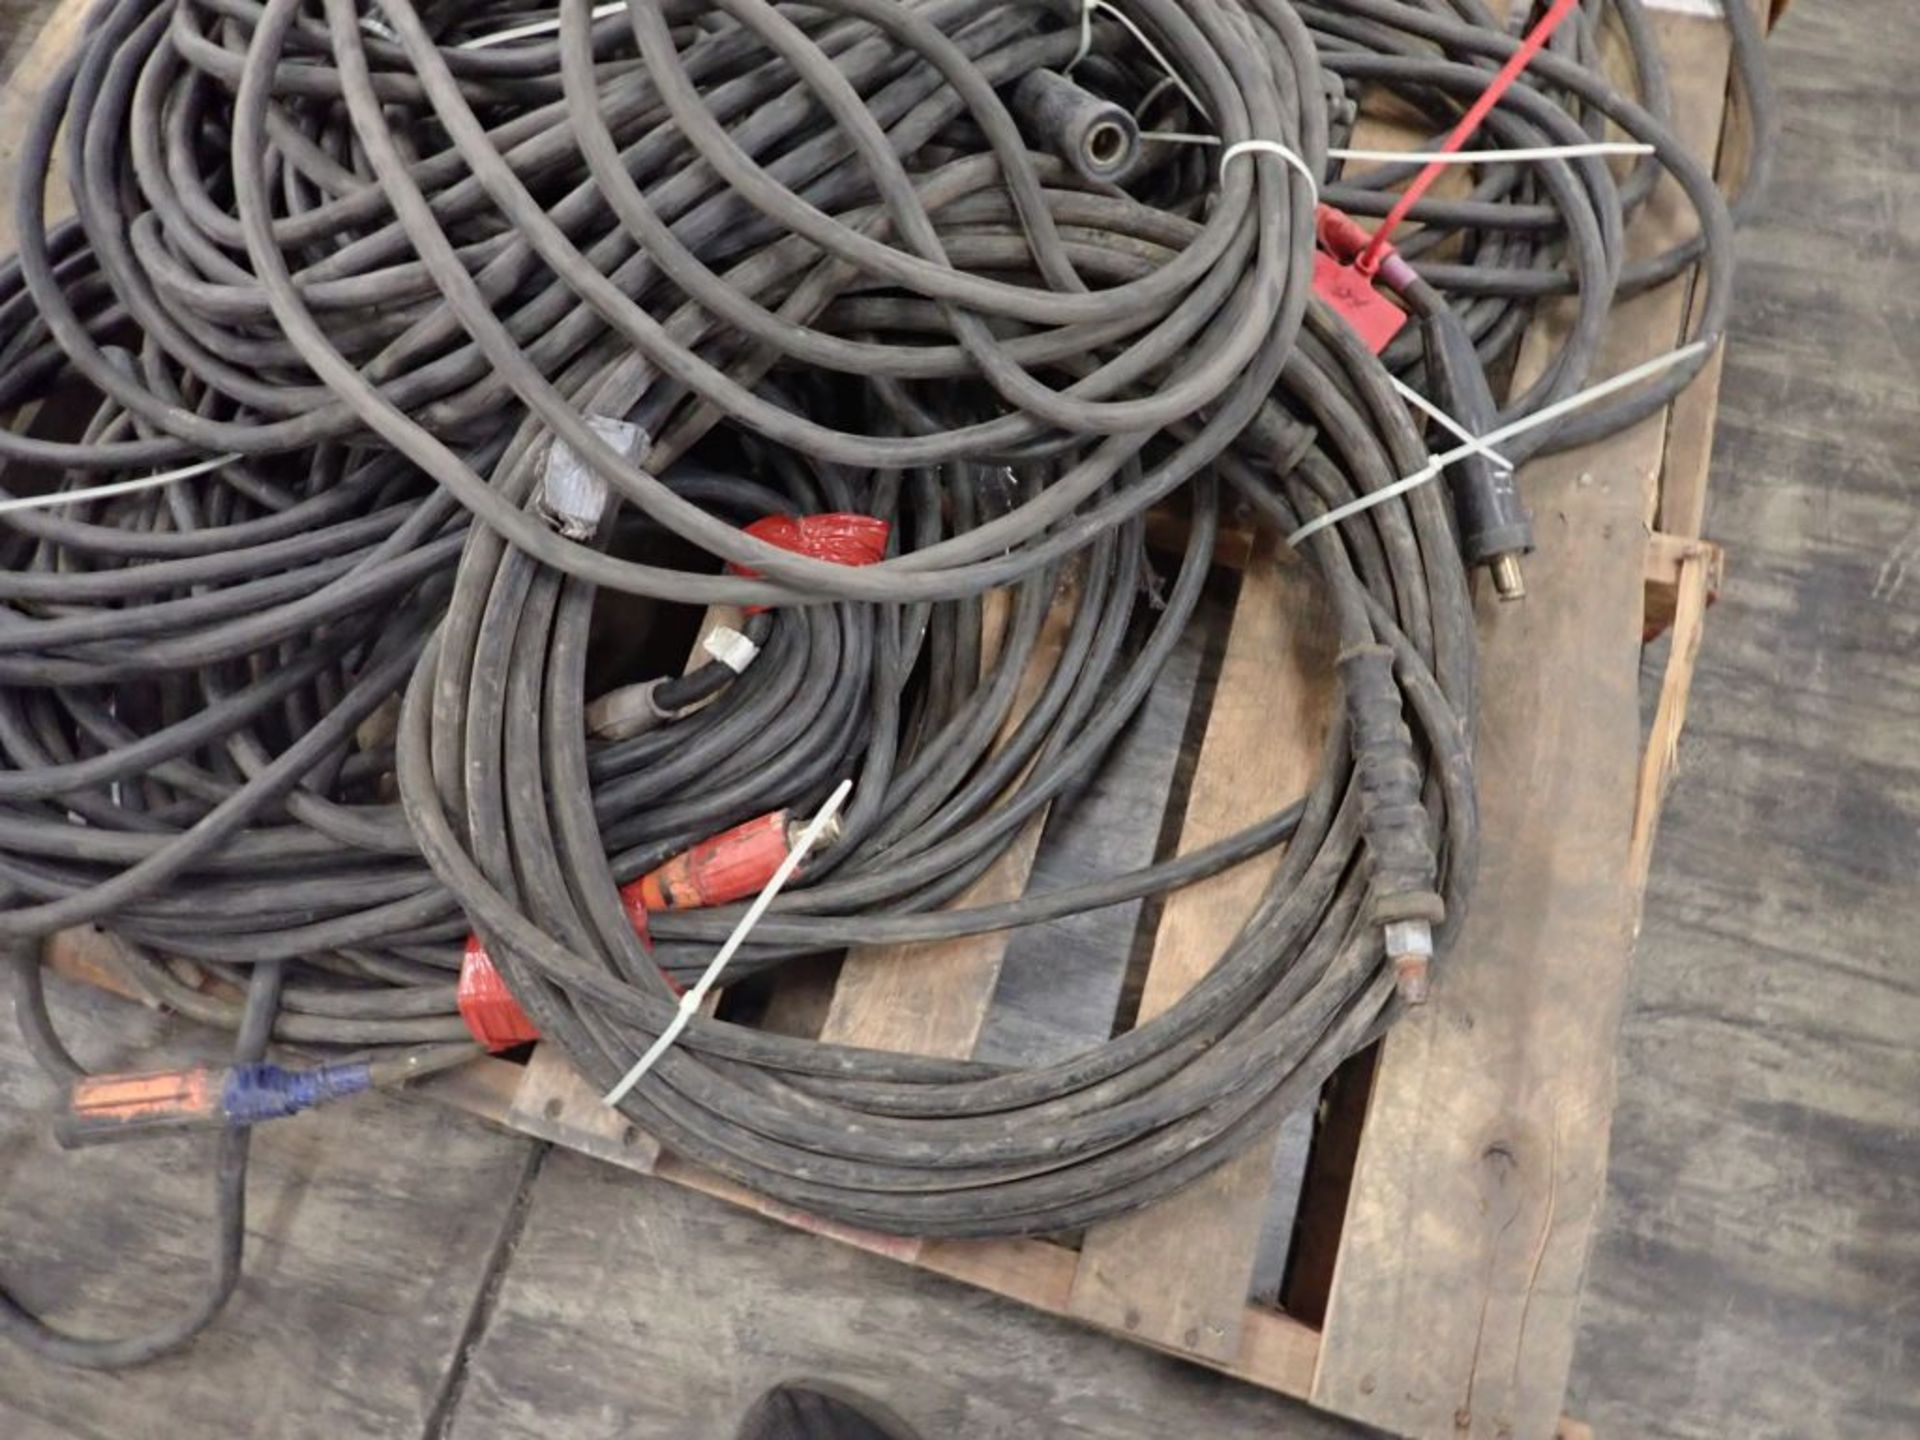 Lot of Assorted Welding Leads w/Connectors|270 lbs Including Pallet; Tag: 225282 - Image 11 of 13